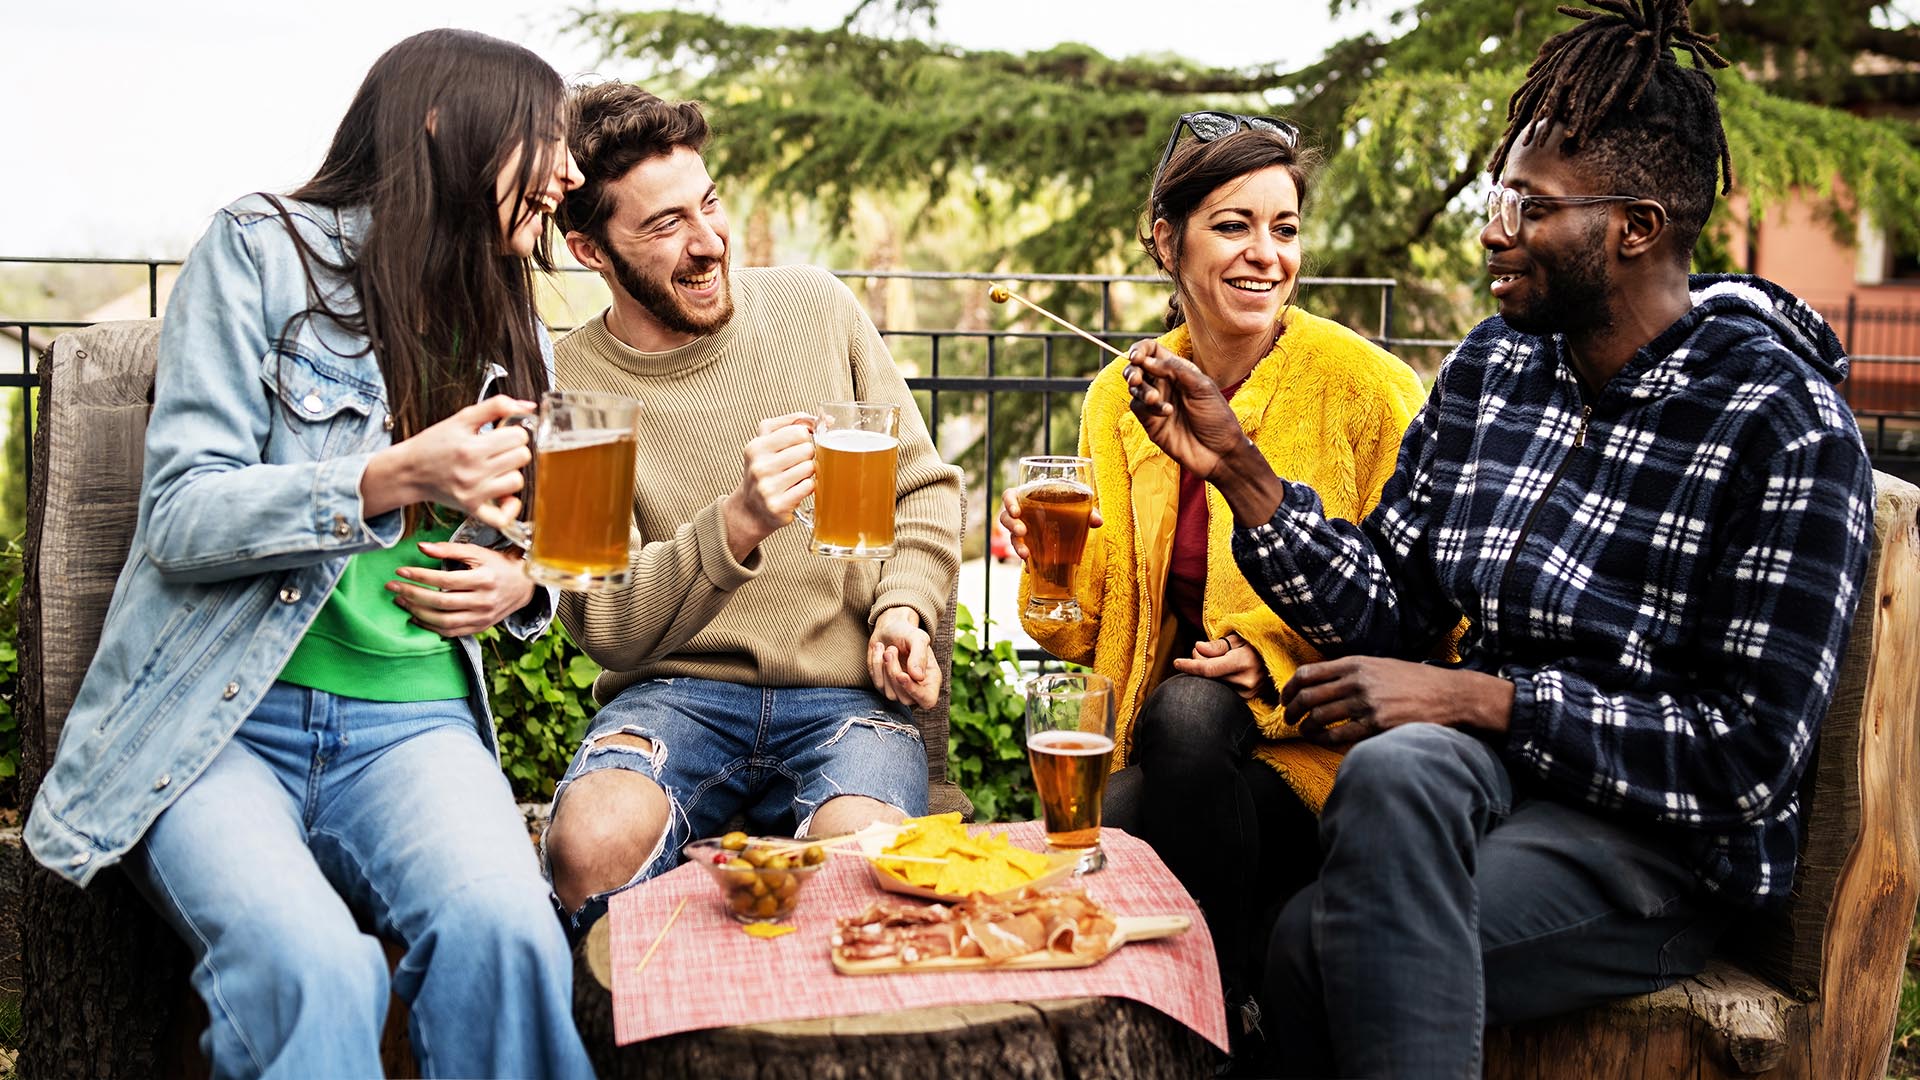 The Sound of Sunshine: How to Create the Perfect Patio Atmosphere with Music and Digital Signage